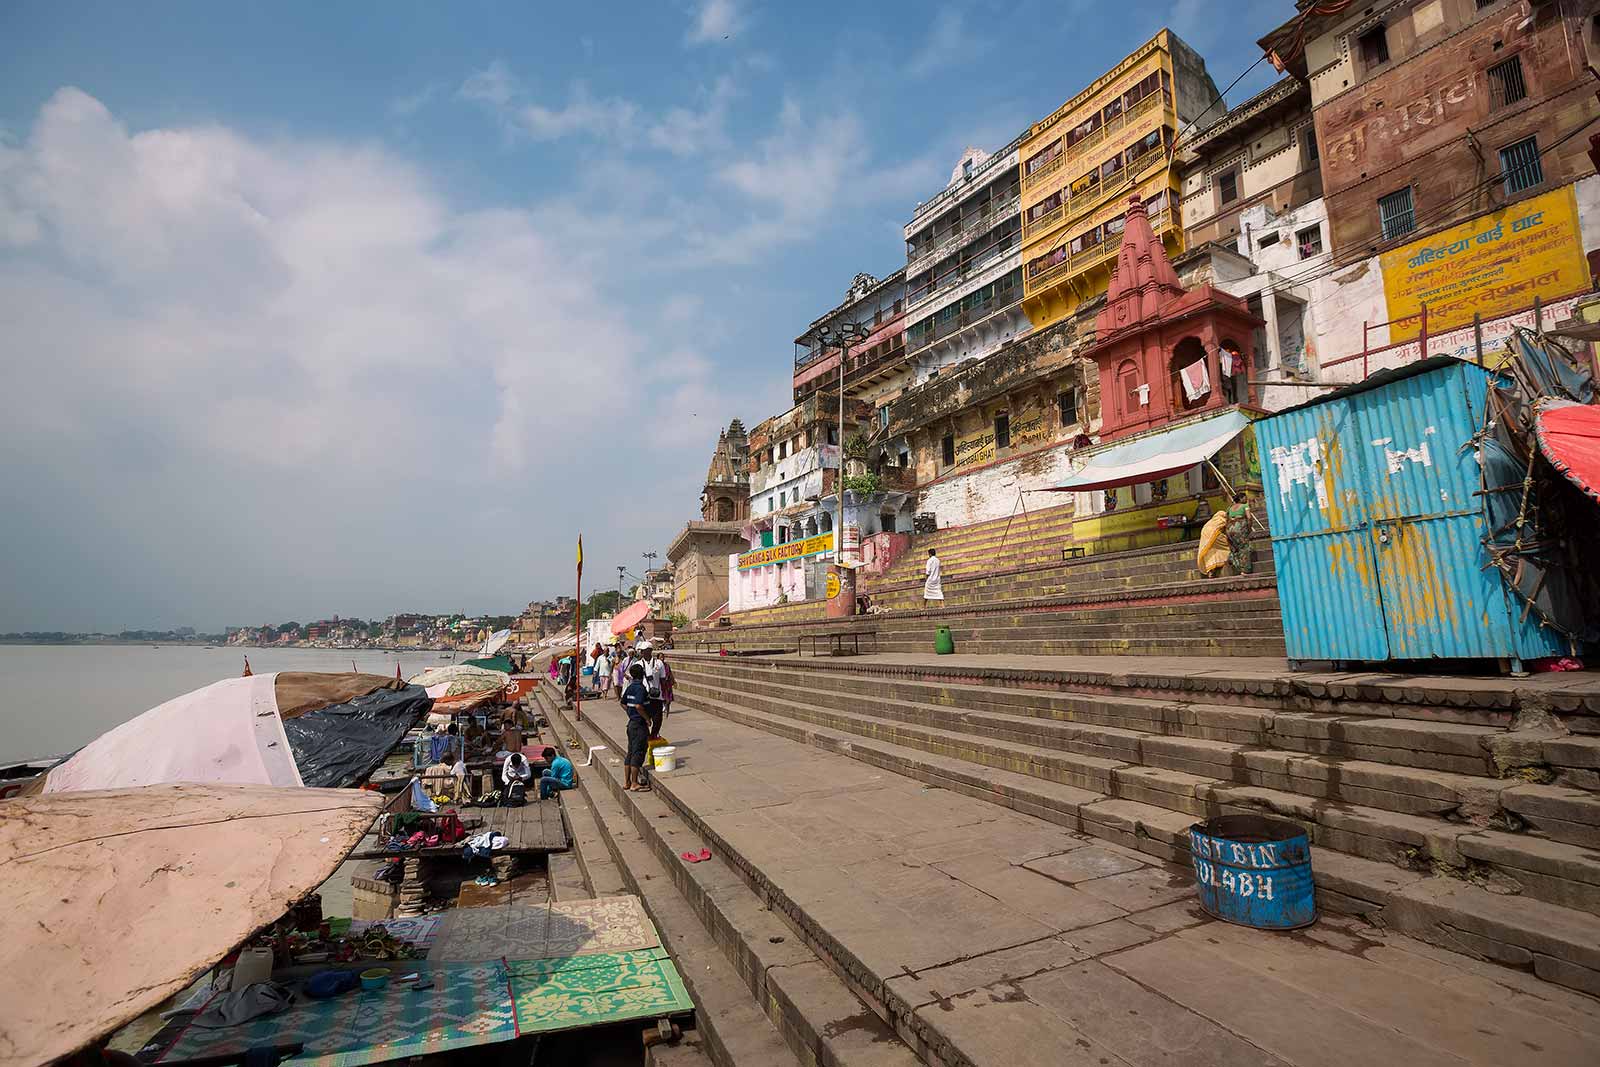 The view of the Varanasi skyline is breathtaking - especially from a boat.